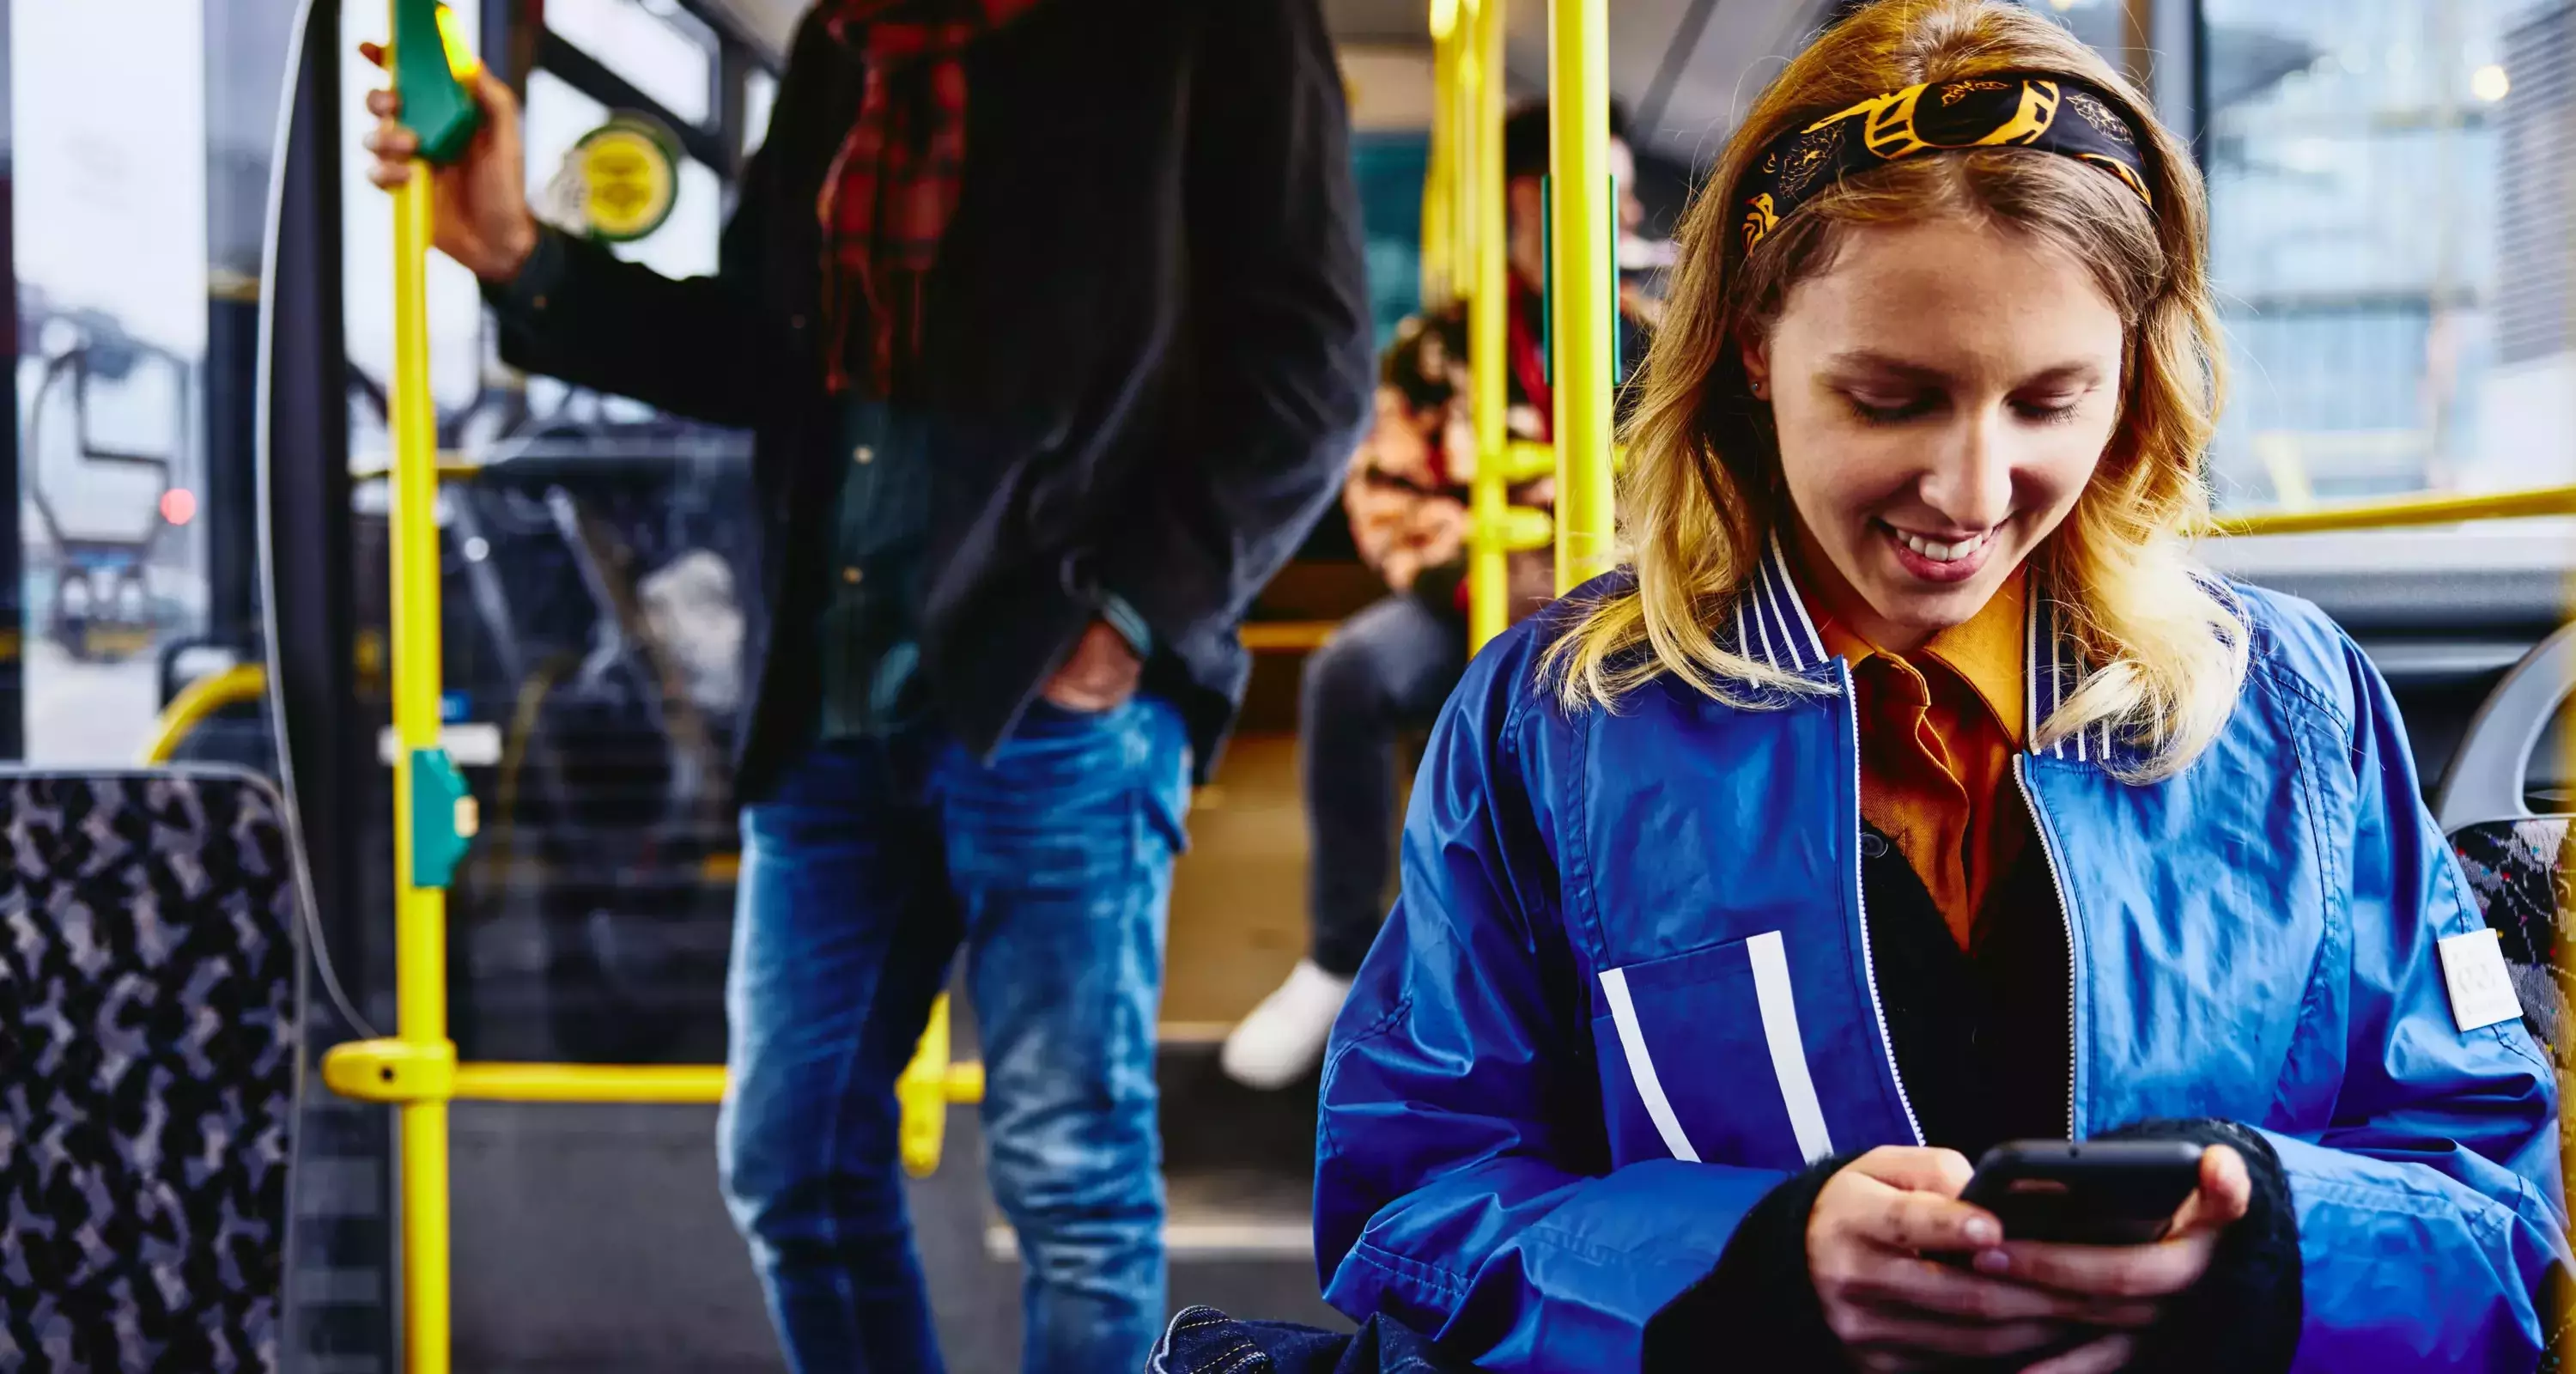 Smiling female sitting in a bus, looking at her phone. Other people in the background.
